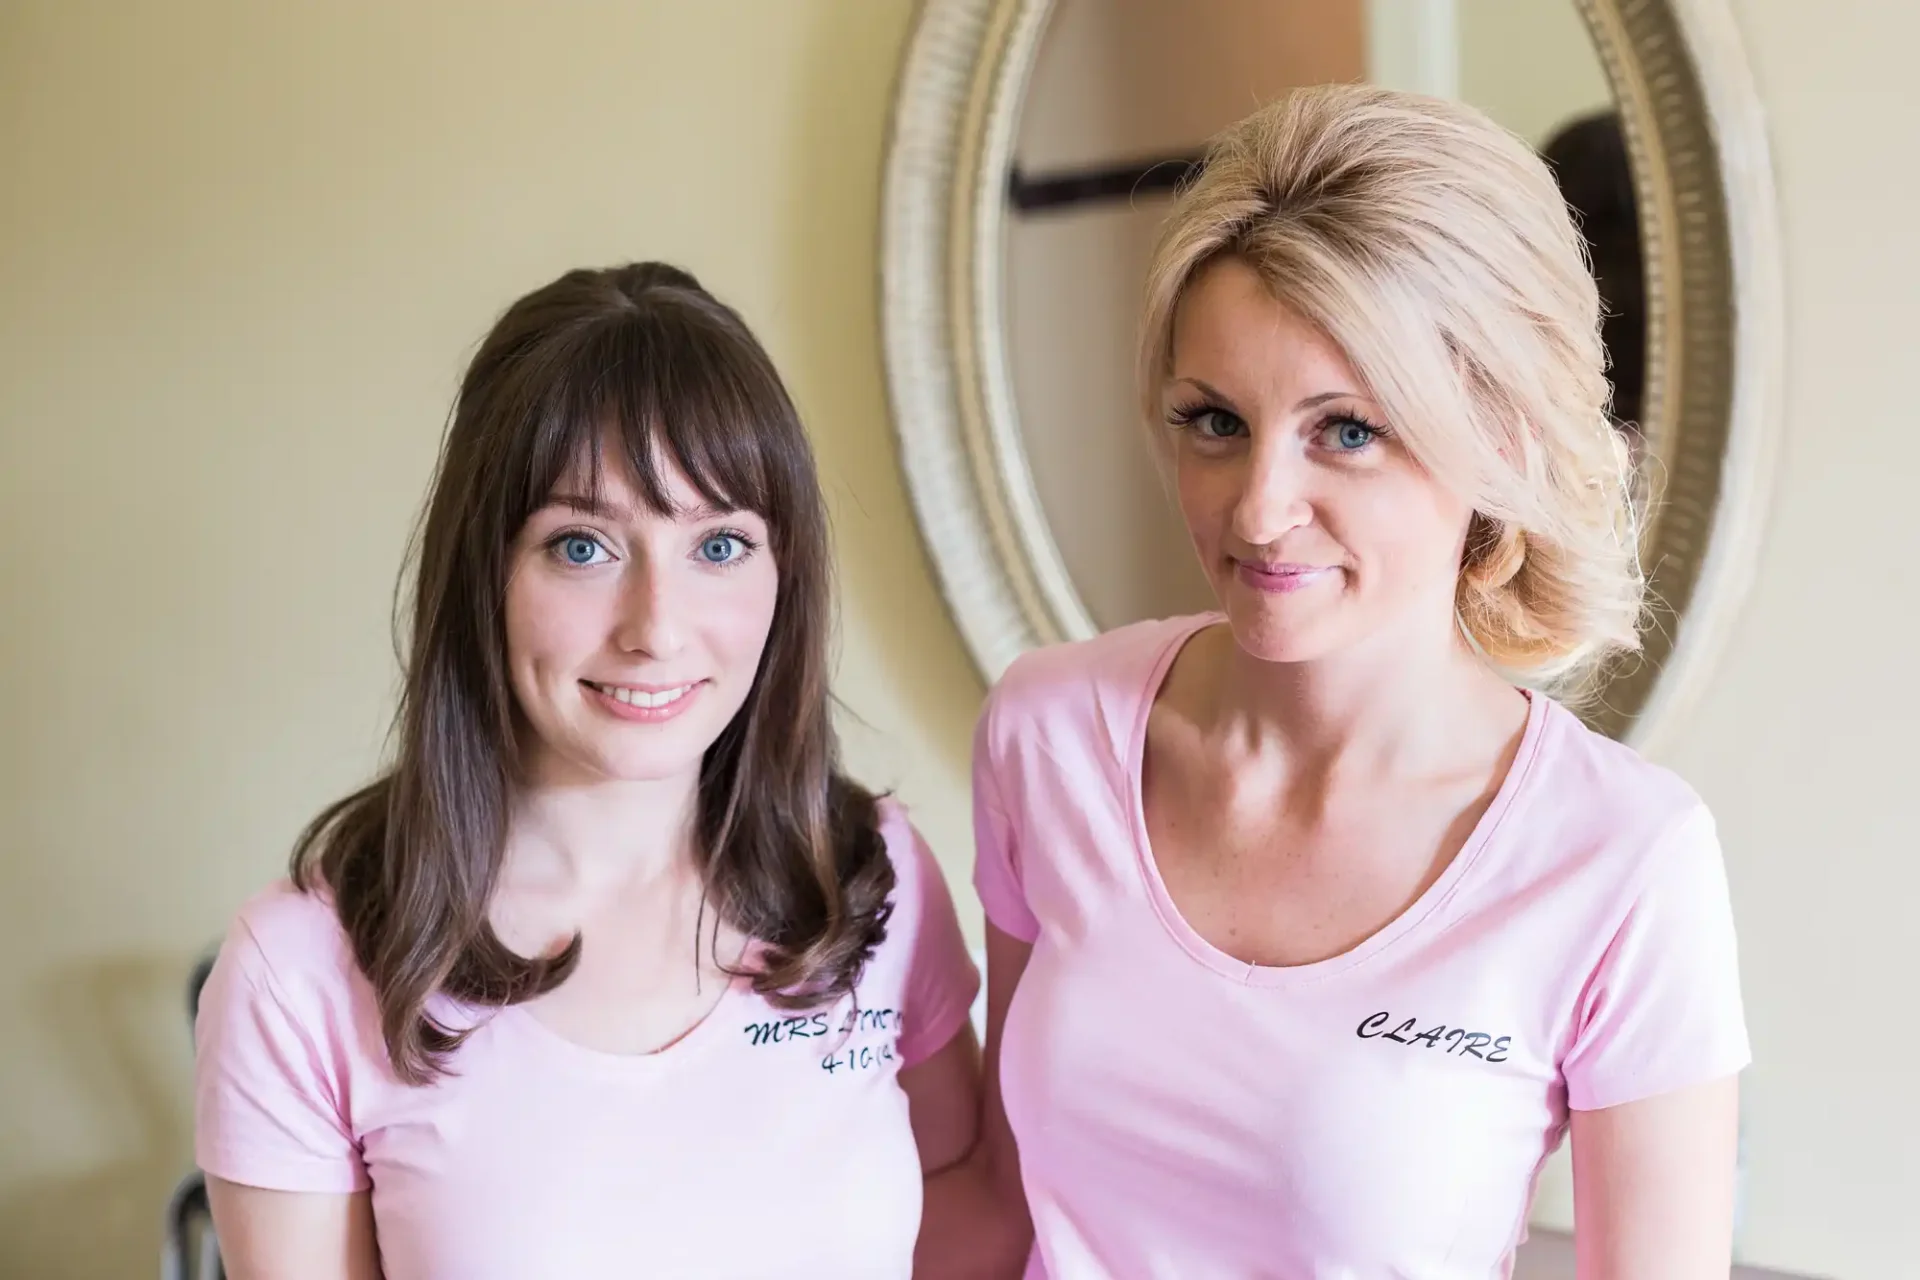 Two women wearing pink t-shirts with name tags, "nicola" and "claire," smiling and seated in front of a mirror.